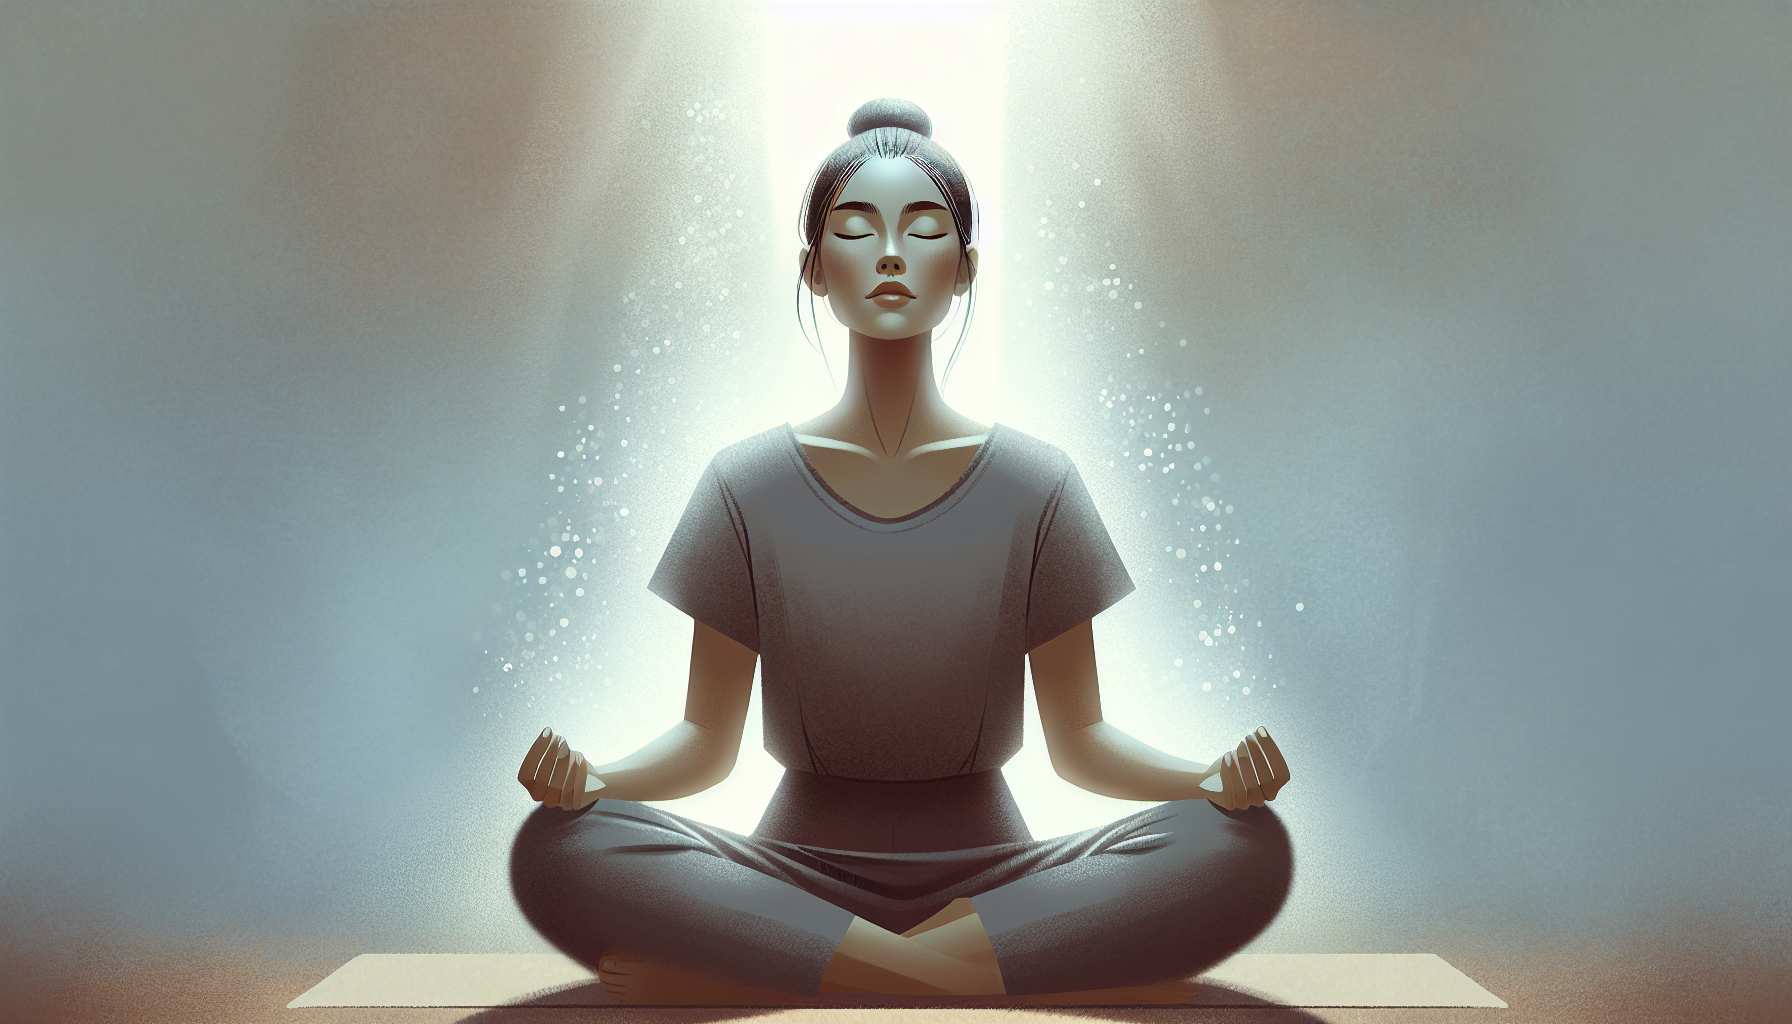 Illustration of deep breathing for stress relief